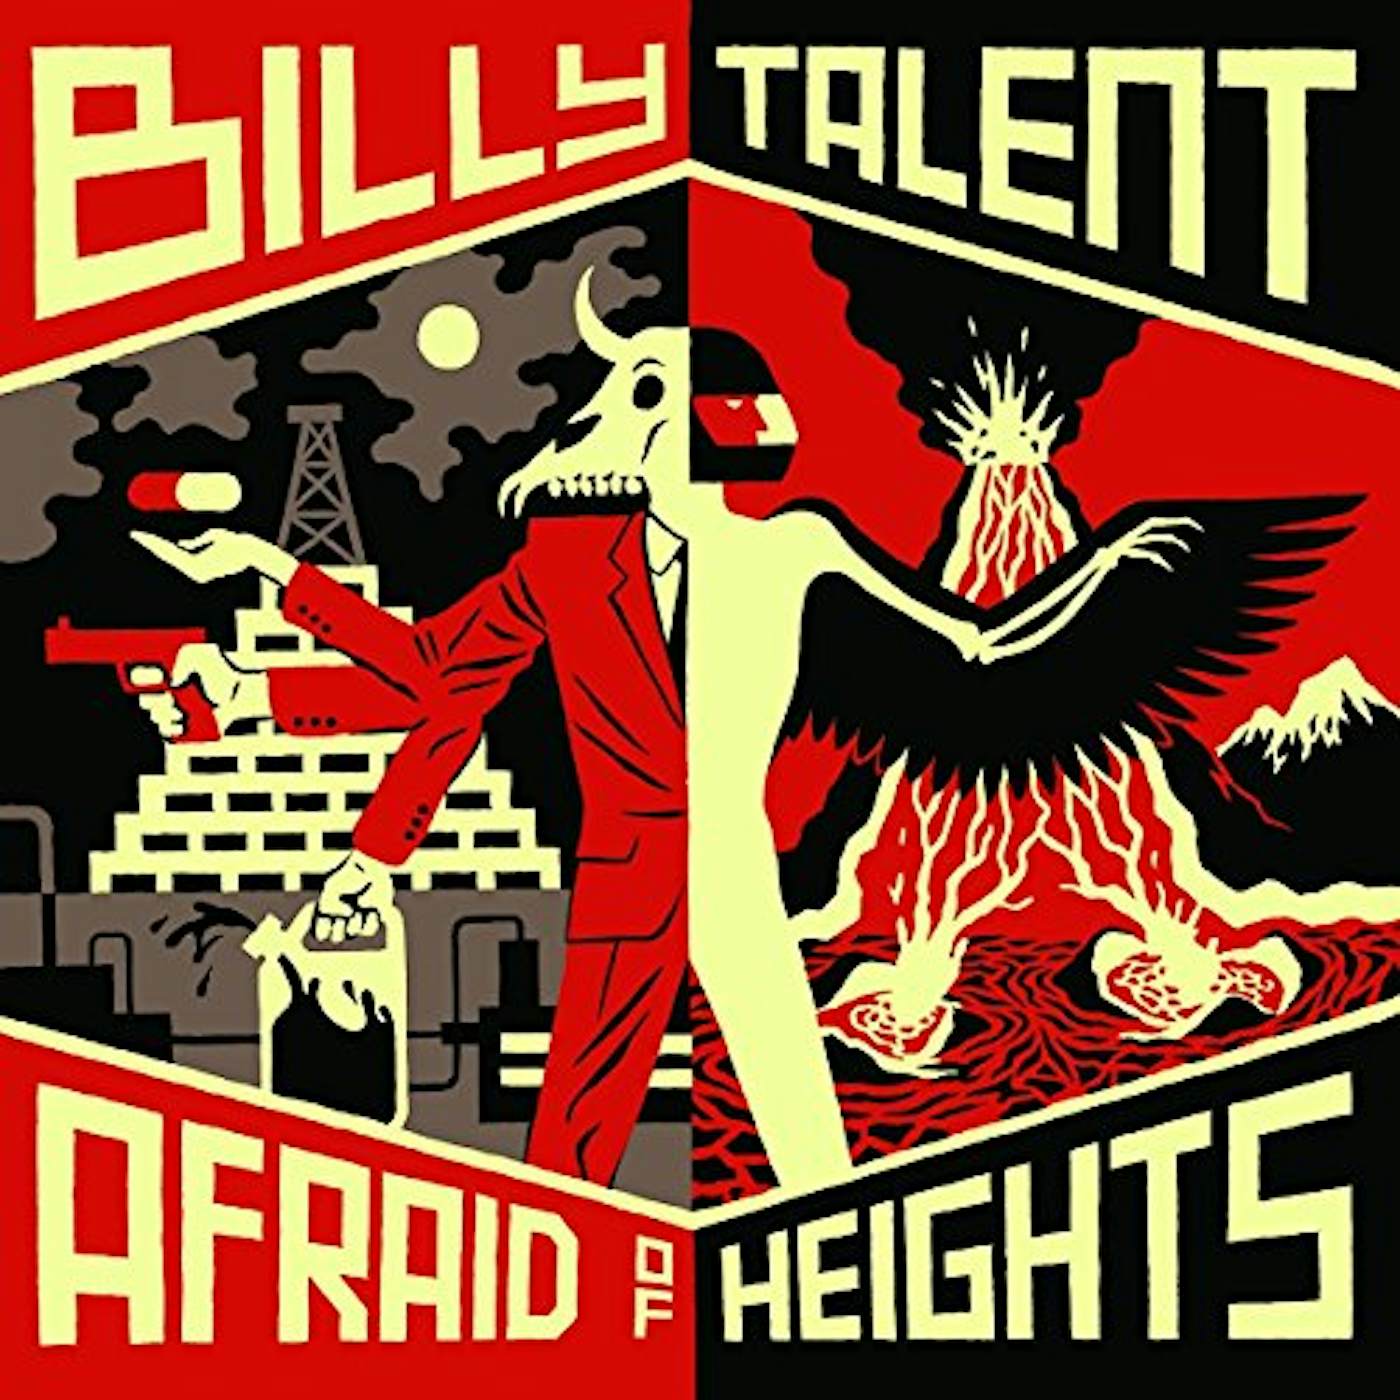 Billy Talent Afraid of Heights Vinyl Record